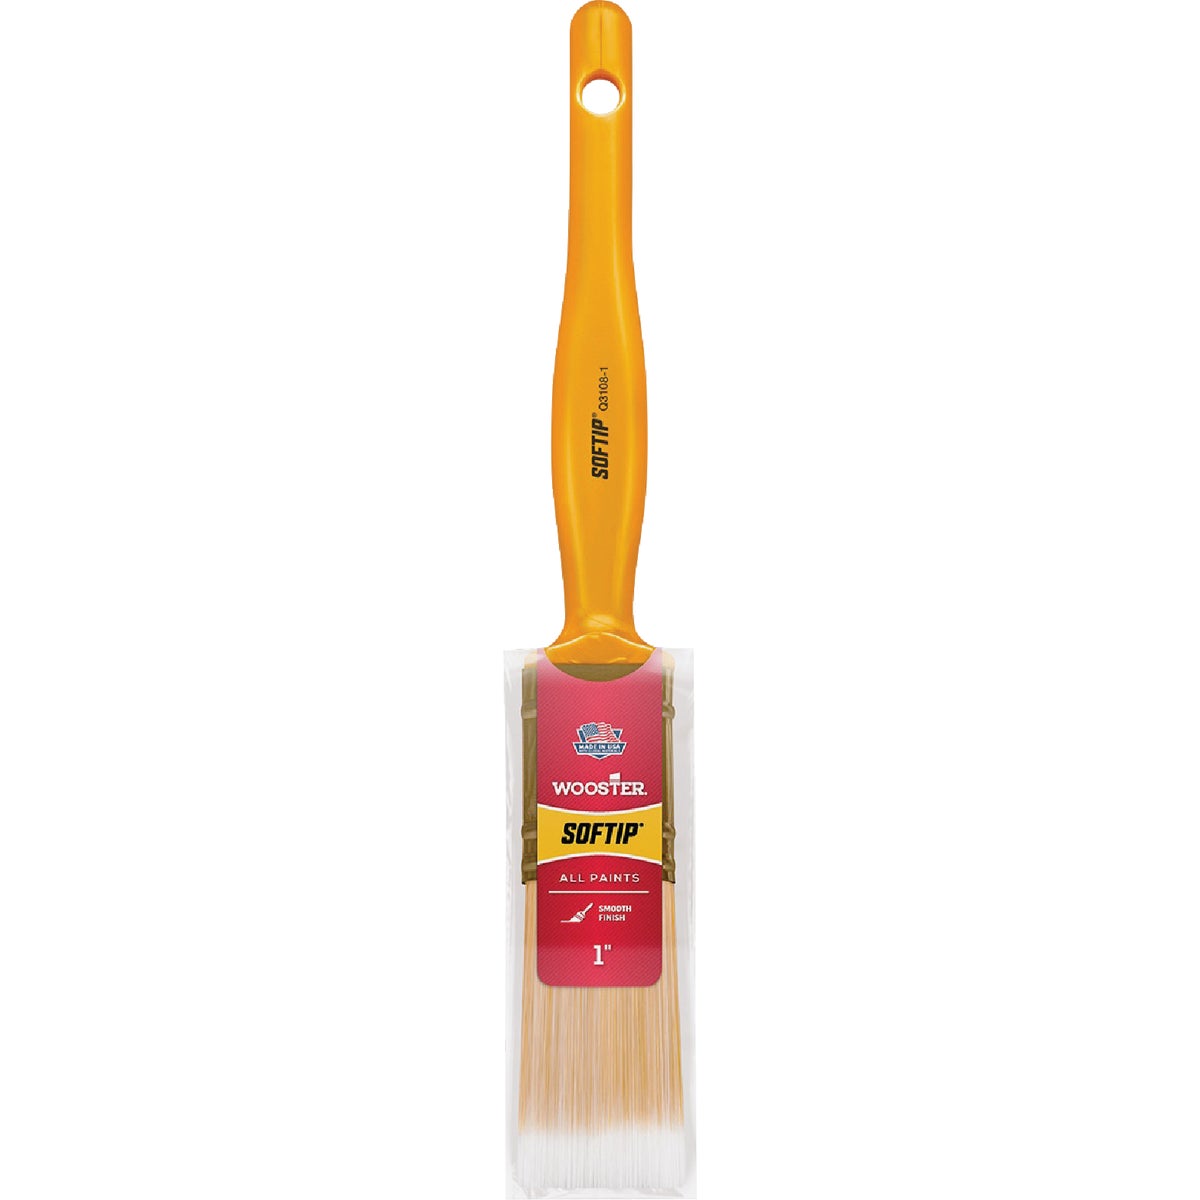 Item 773640, A good quality synthetic brush that provides excellent results with latex 